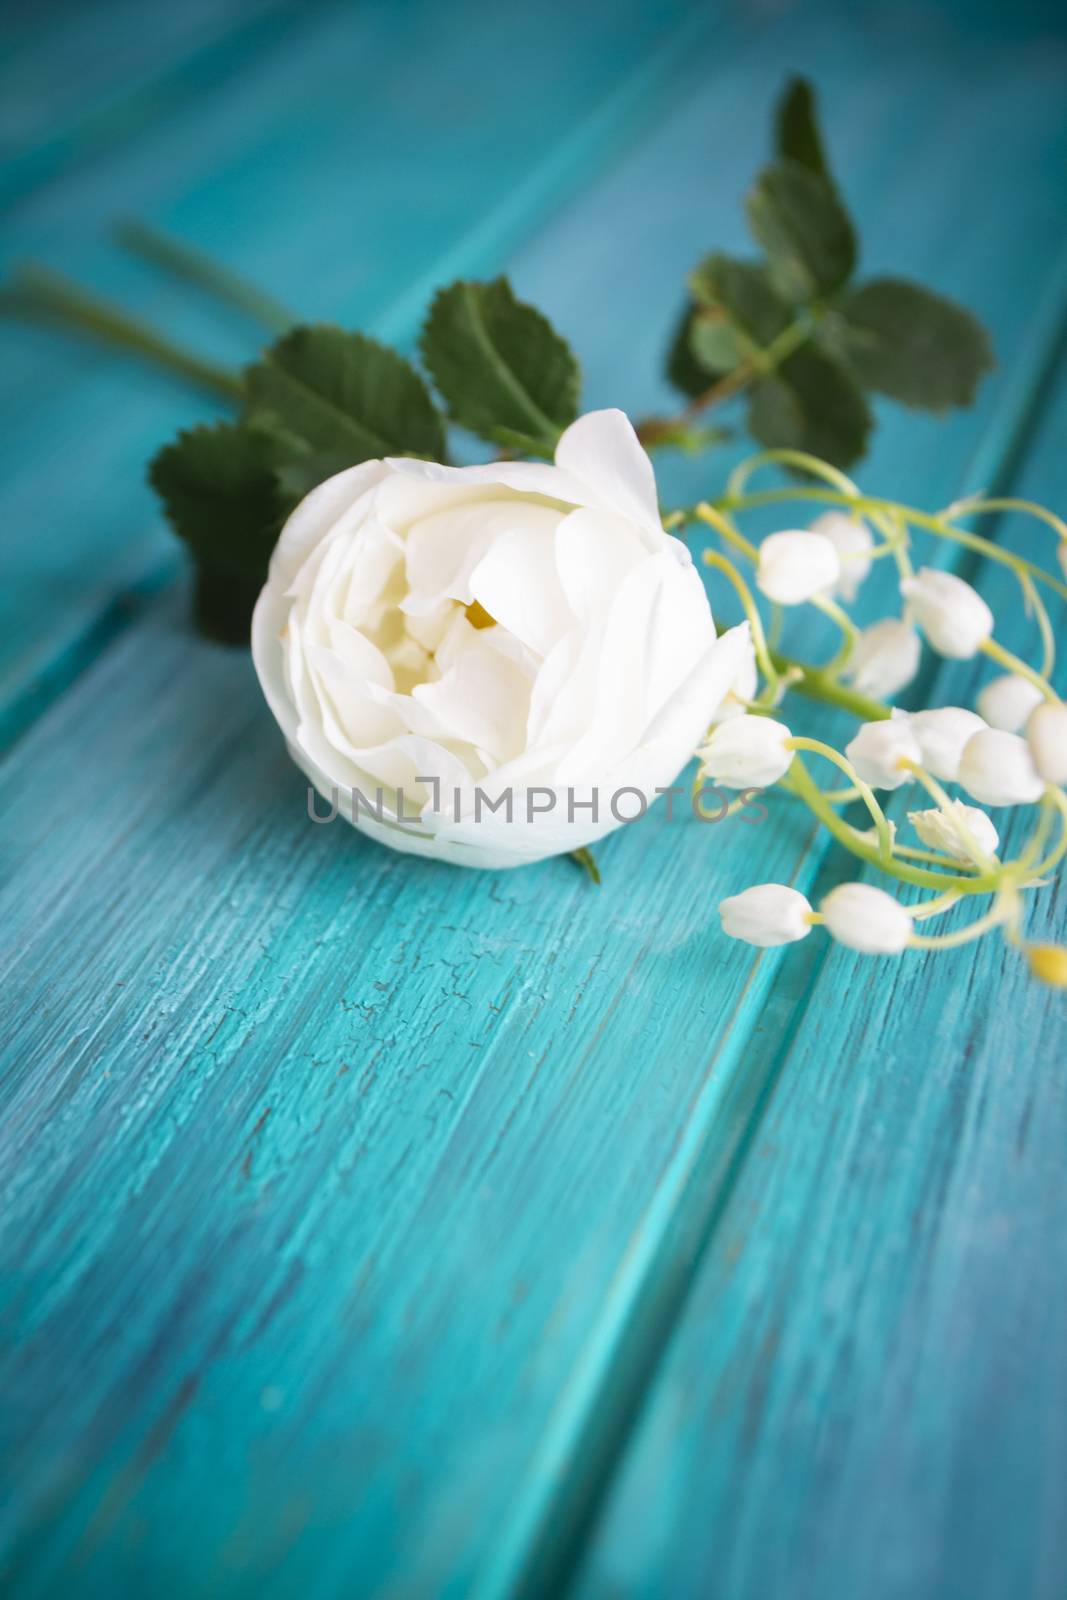 White flower on teal blue wooden table. A bouquet of white roses and lillies of the valley